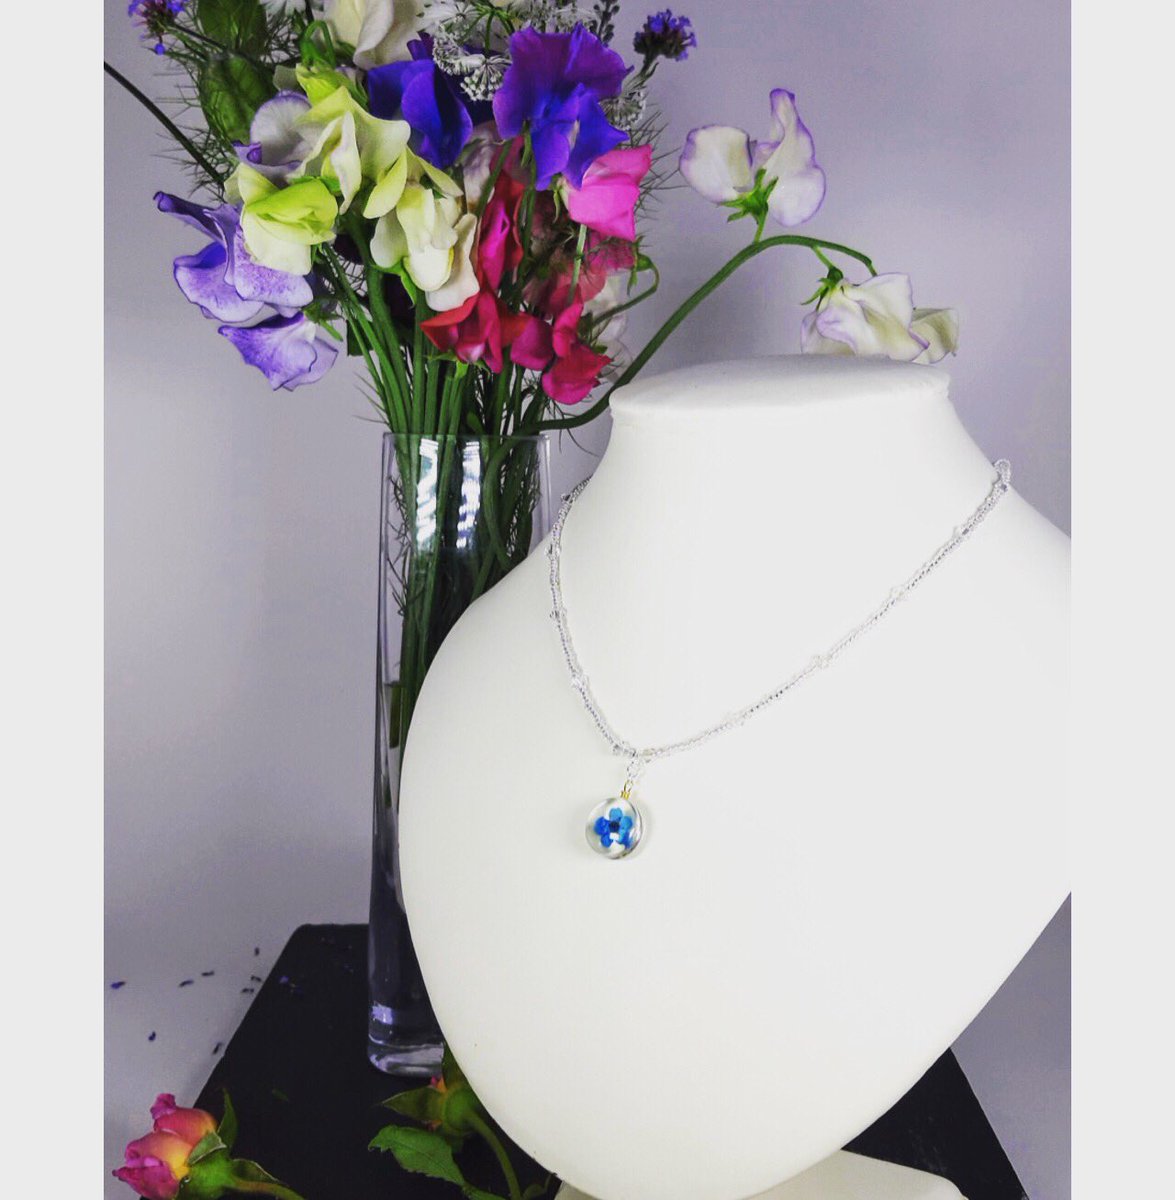 Now available.. #Handmade #Crystal #Necklace featuring a glass #Pendant with a #Blue #DriedFlower #JewelleryByKellyJane #HandmadeJewellery #InspiredByNature #MotherNature #FloralNecklace #FloralJewellery #Shaftesbury #Flowers #MadeWithLove jewellerybykellyjane.com/shop/necklace-…